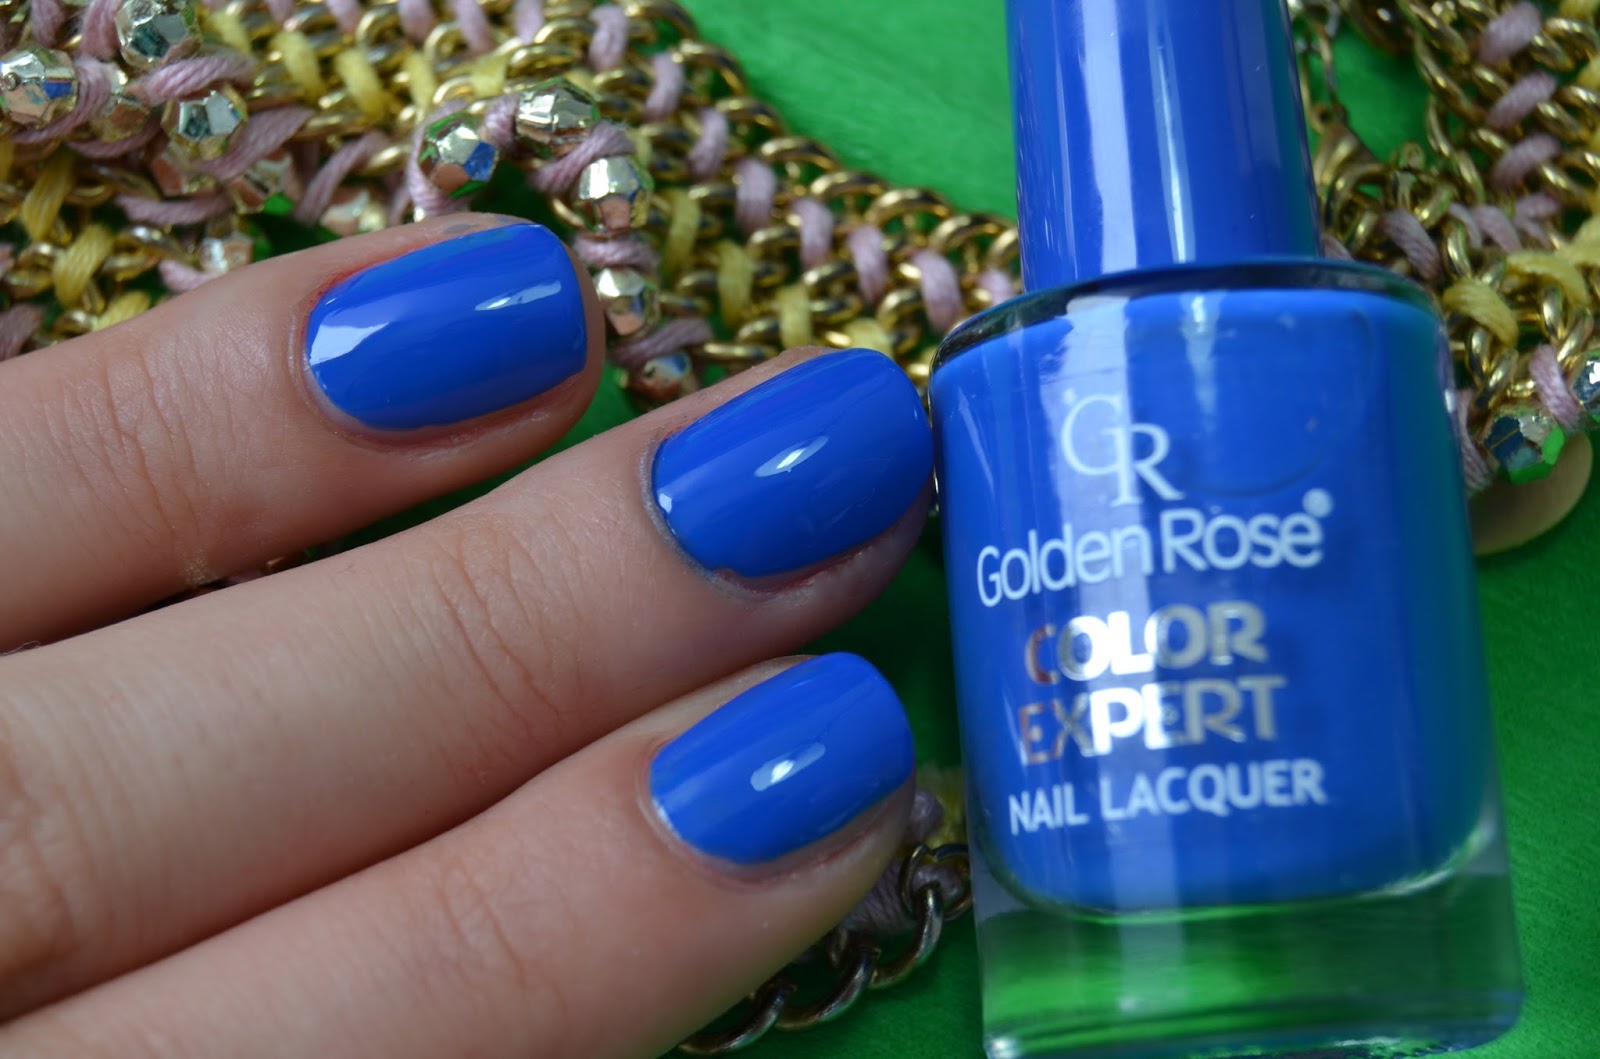 Golden Rose Color Expert Nail Lacquer - wide 2